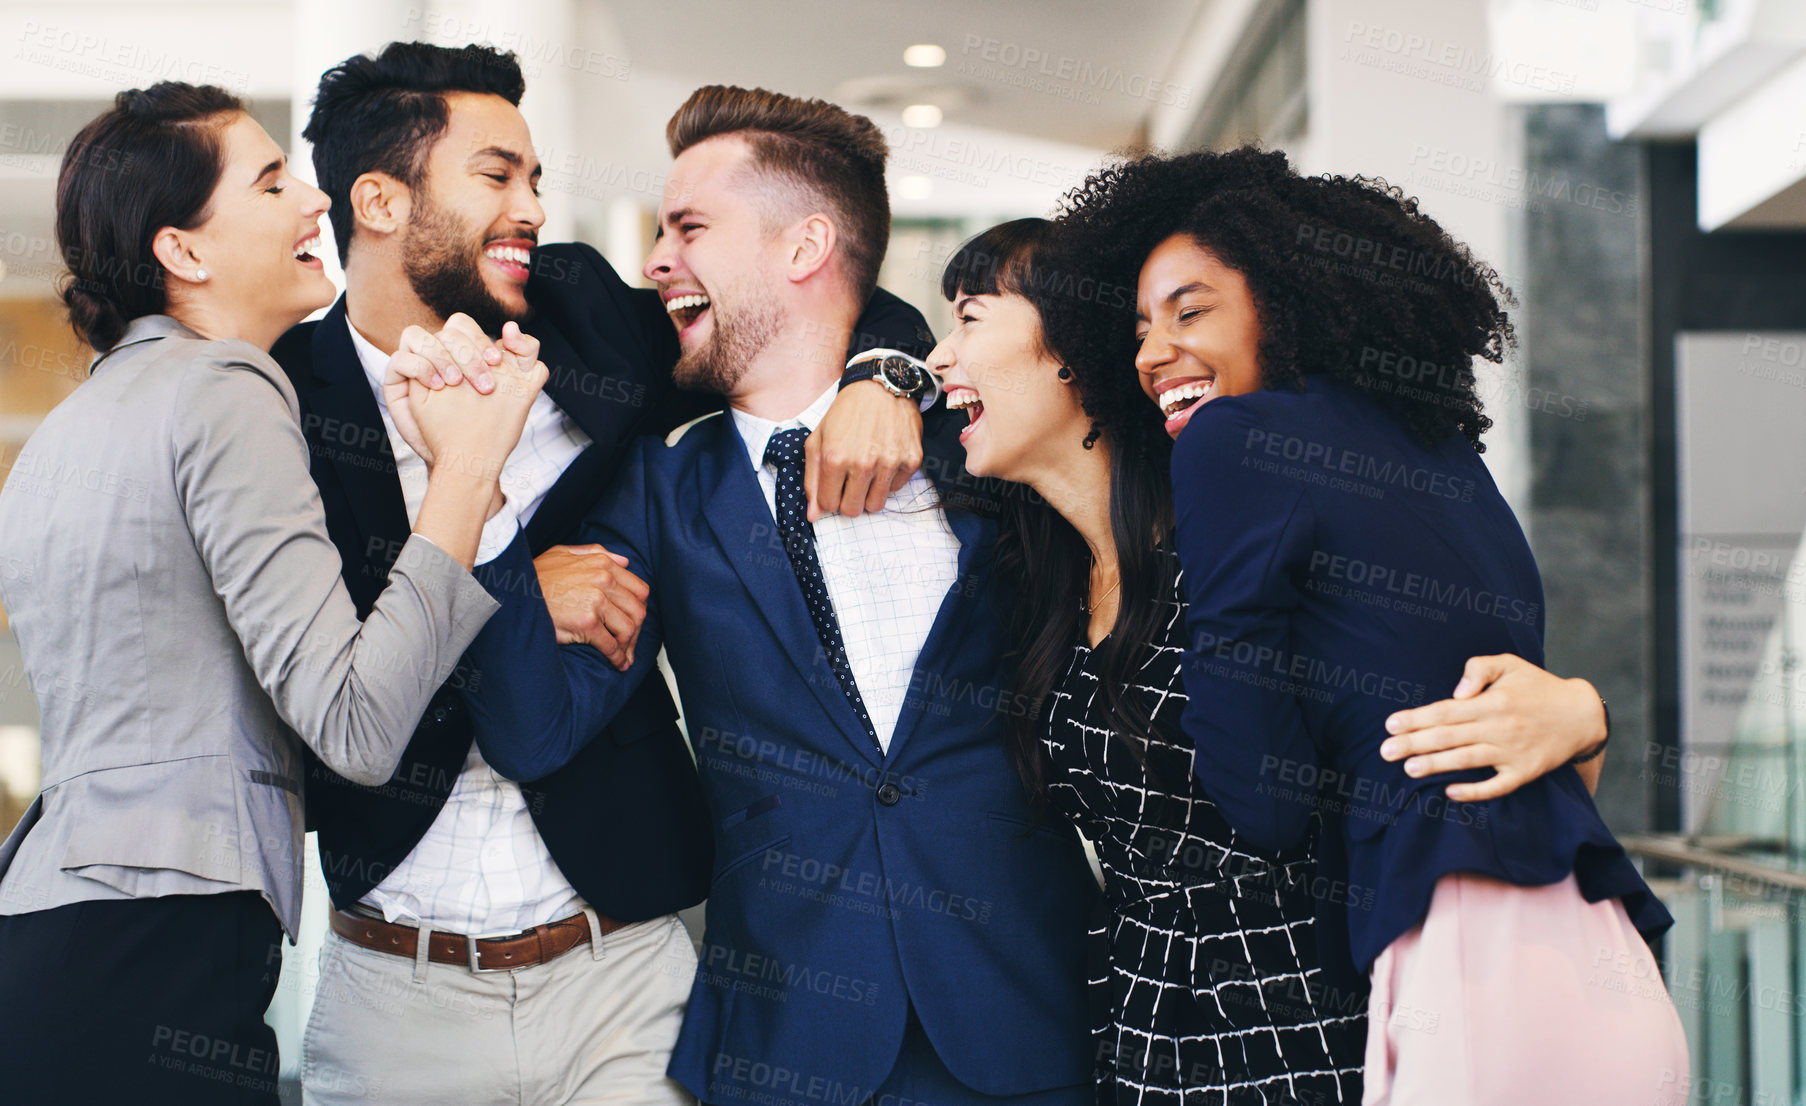 Buy stock photo Cropped shot of a diverse group of businesspeople hugging each other while in the office during the day